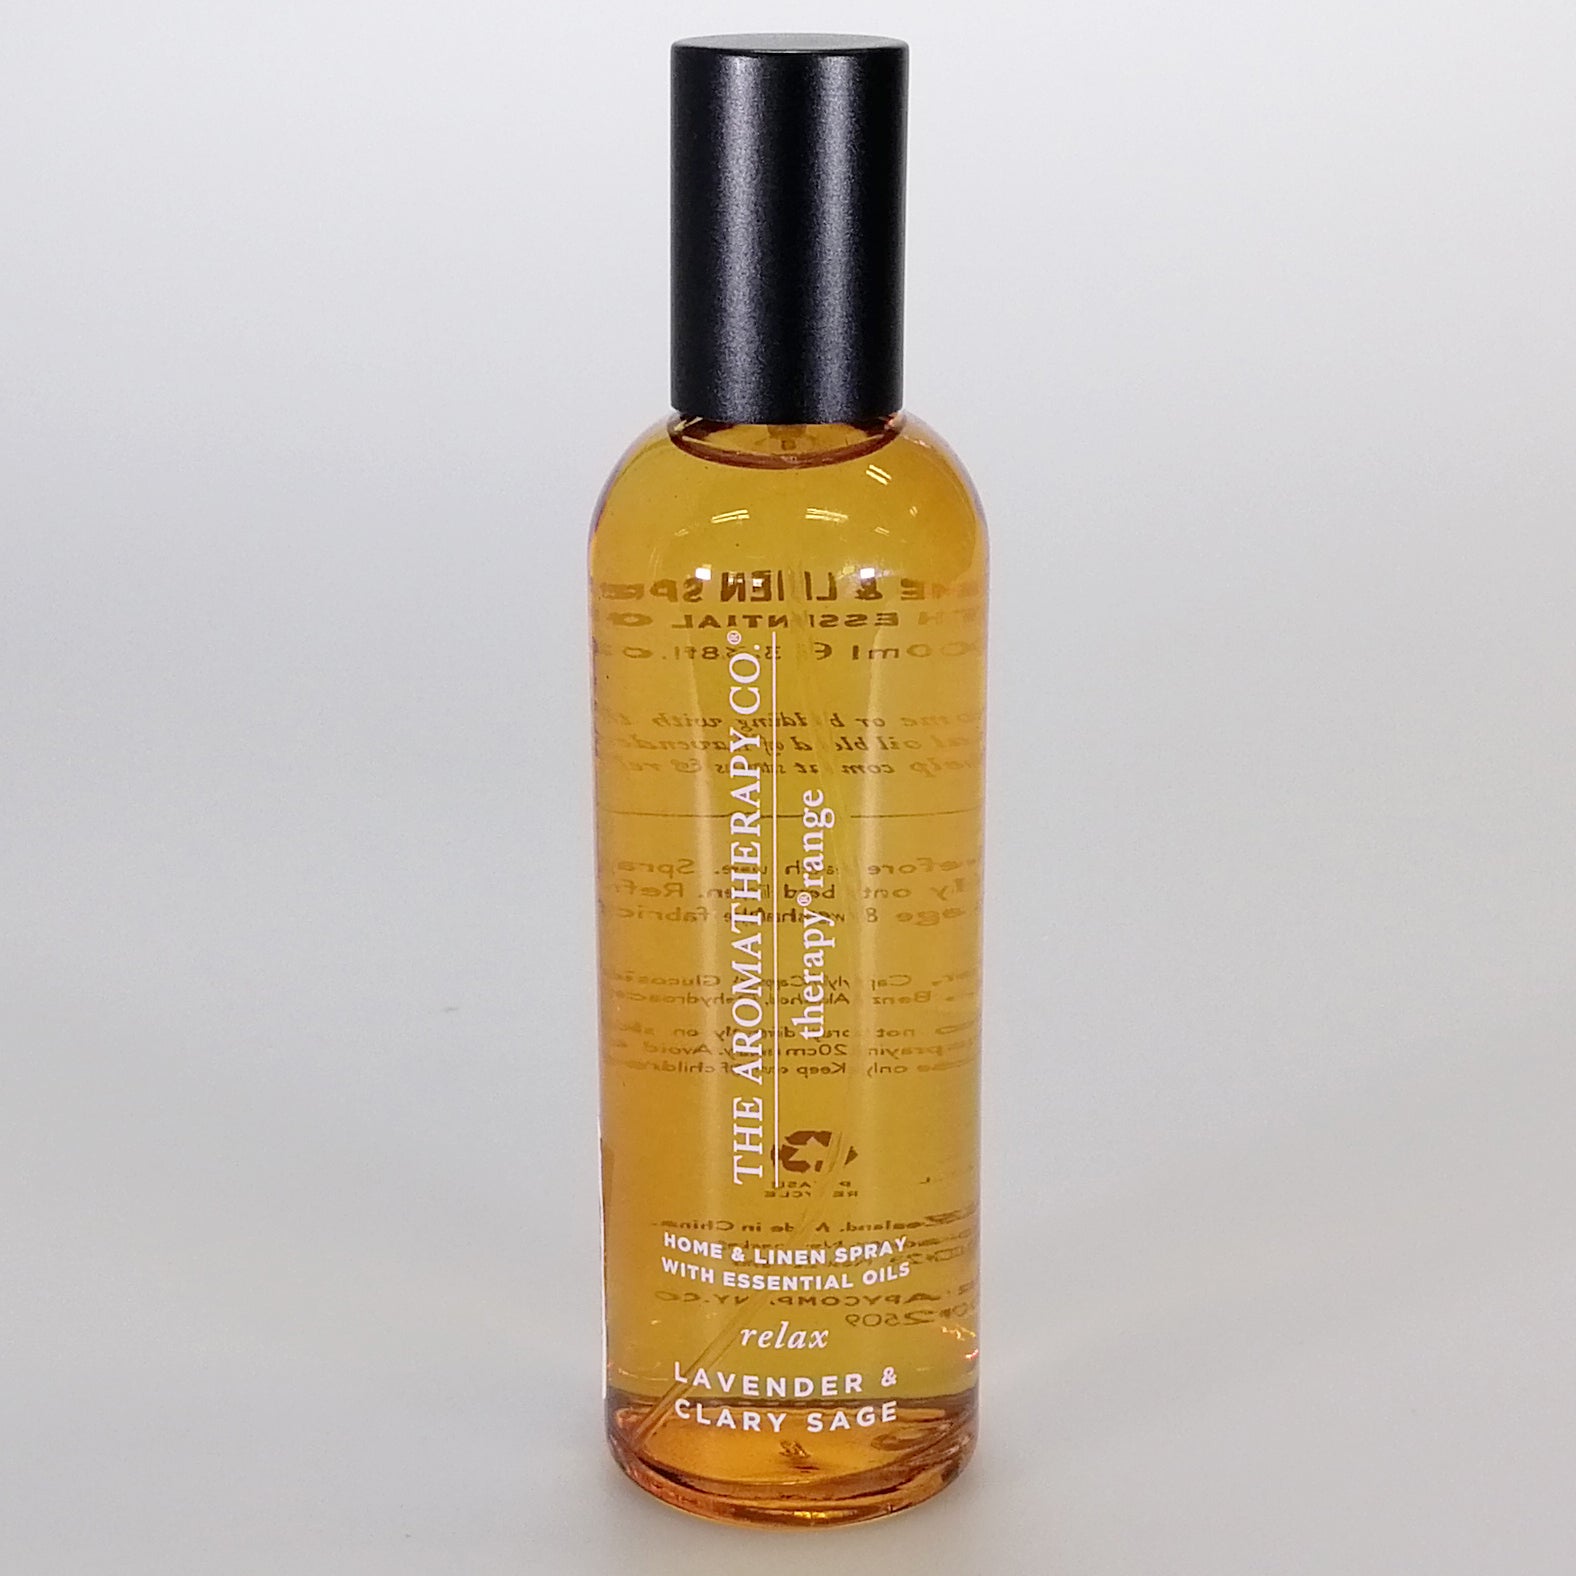 The Aromatherapy Company - Therapy Range 'Relax' - Linen Spray - Lavender & Clary Sage